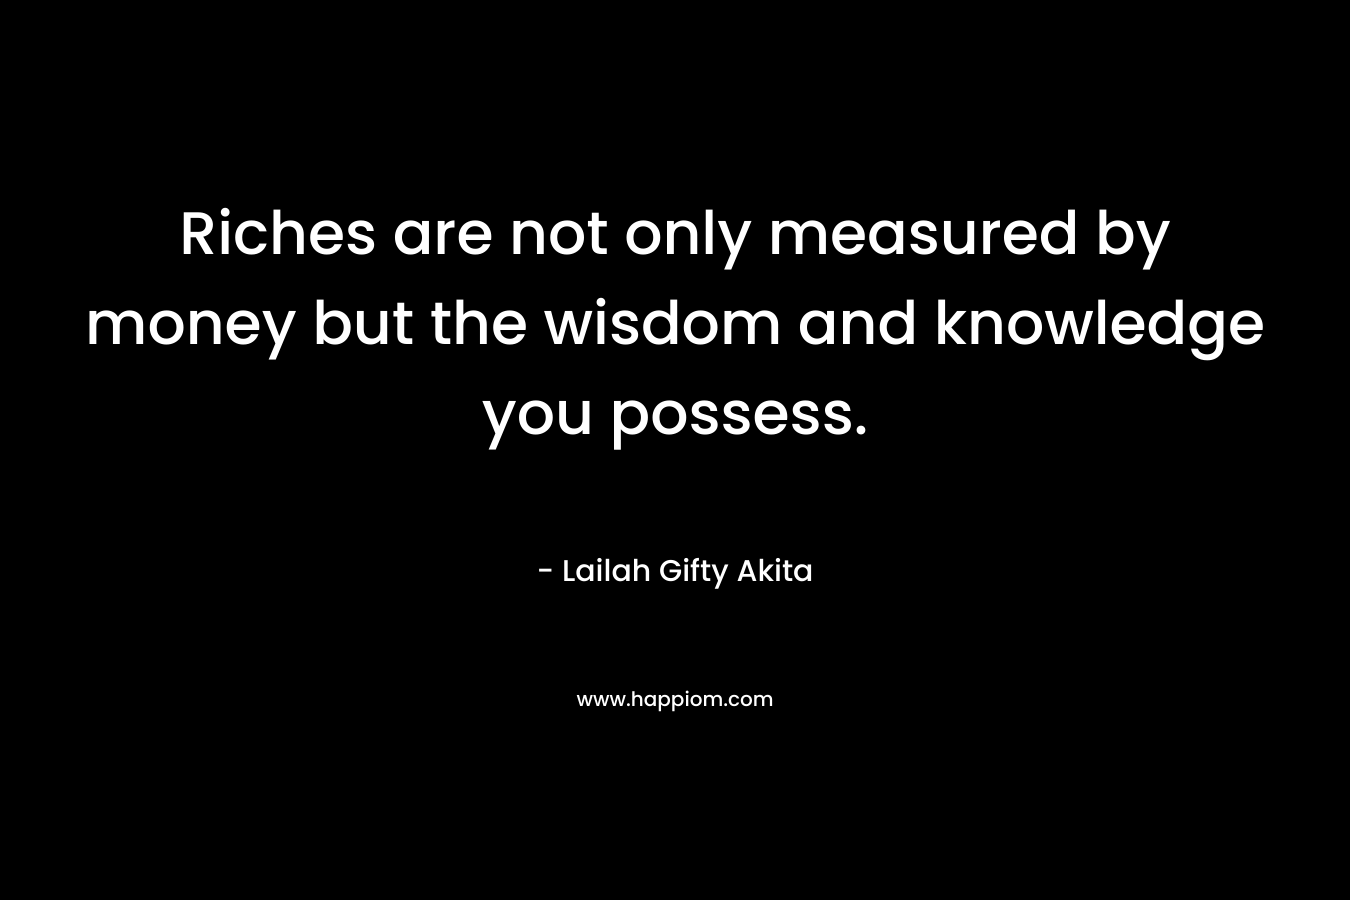 Riches are not only measured by money but the wisdom and knowledge you possess.